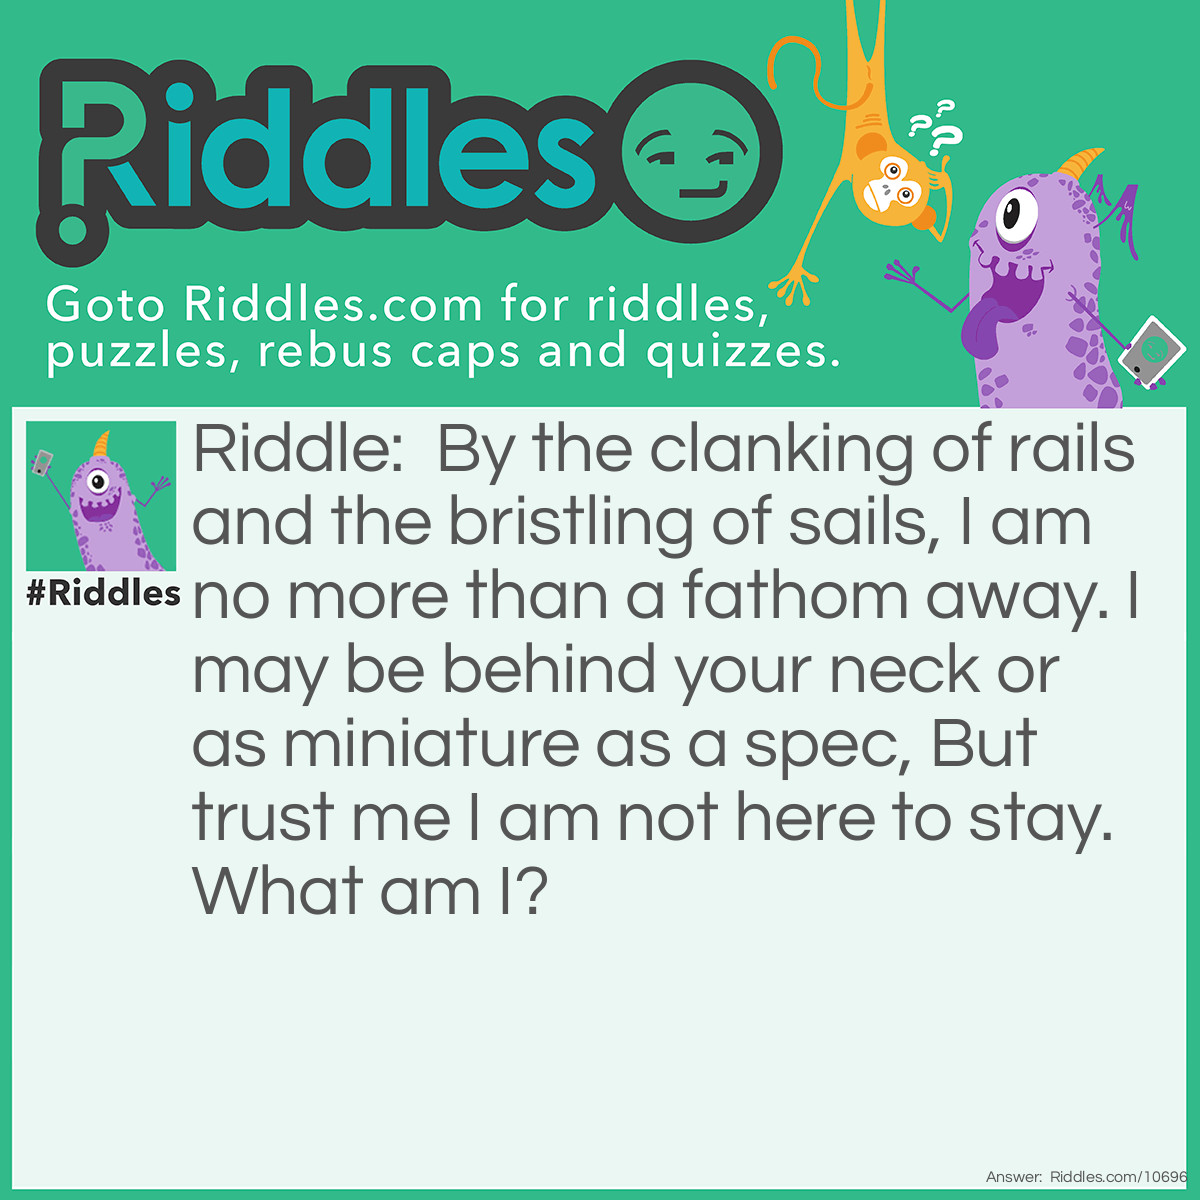 Riddle: By the clanking of rails and the bristling of sails, I am no more than a fathom away. I may be behind your neck or as miniature as a spec, But trust me I am not here to stay. What am I? Answer: A passenger.